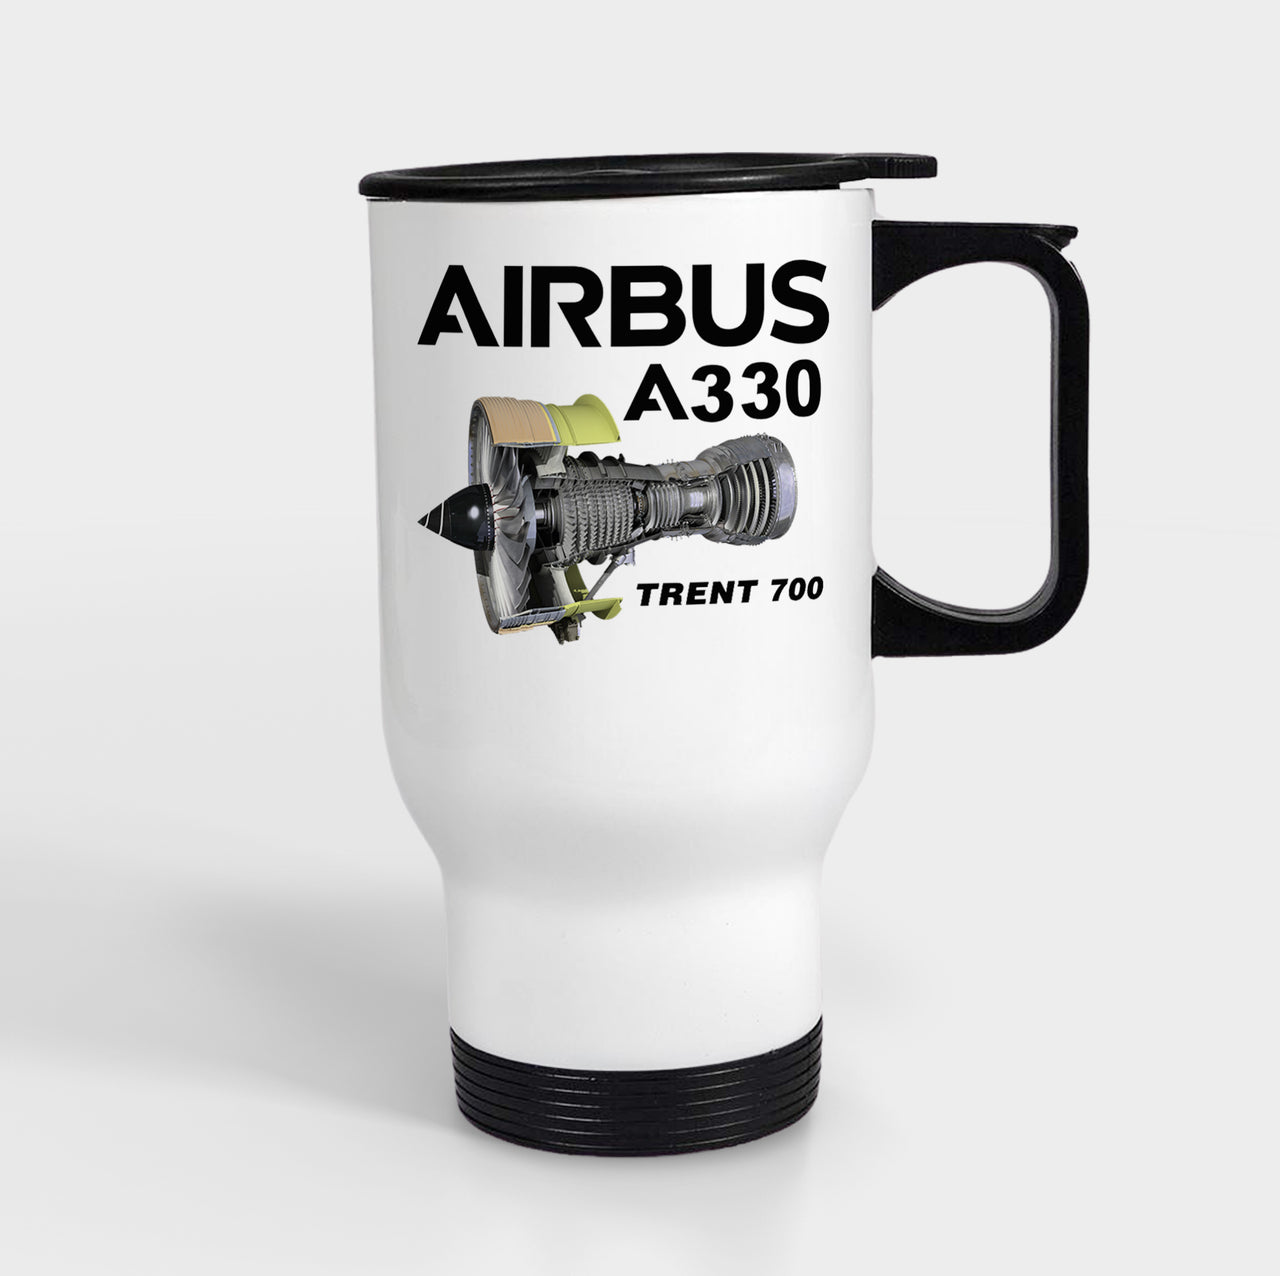 Airbus A330 & Trent 700 Engine Designed Travel Mugs (With Holder)